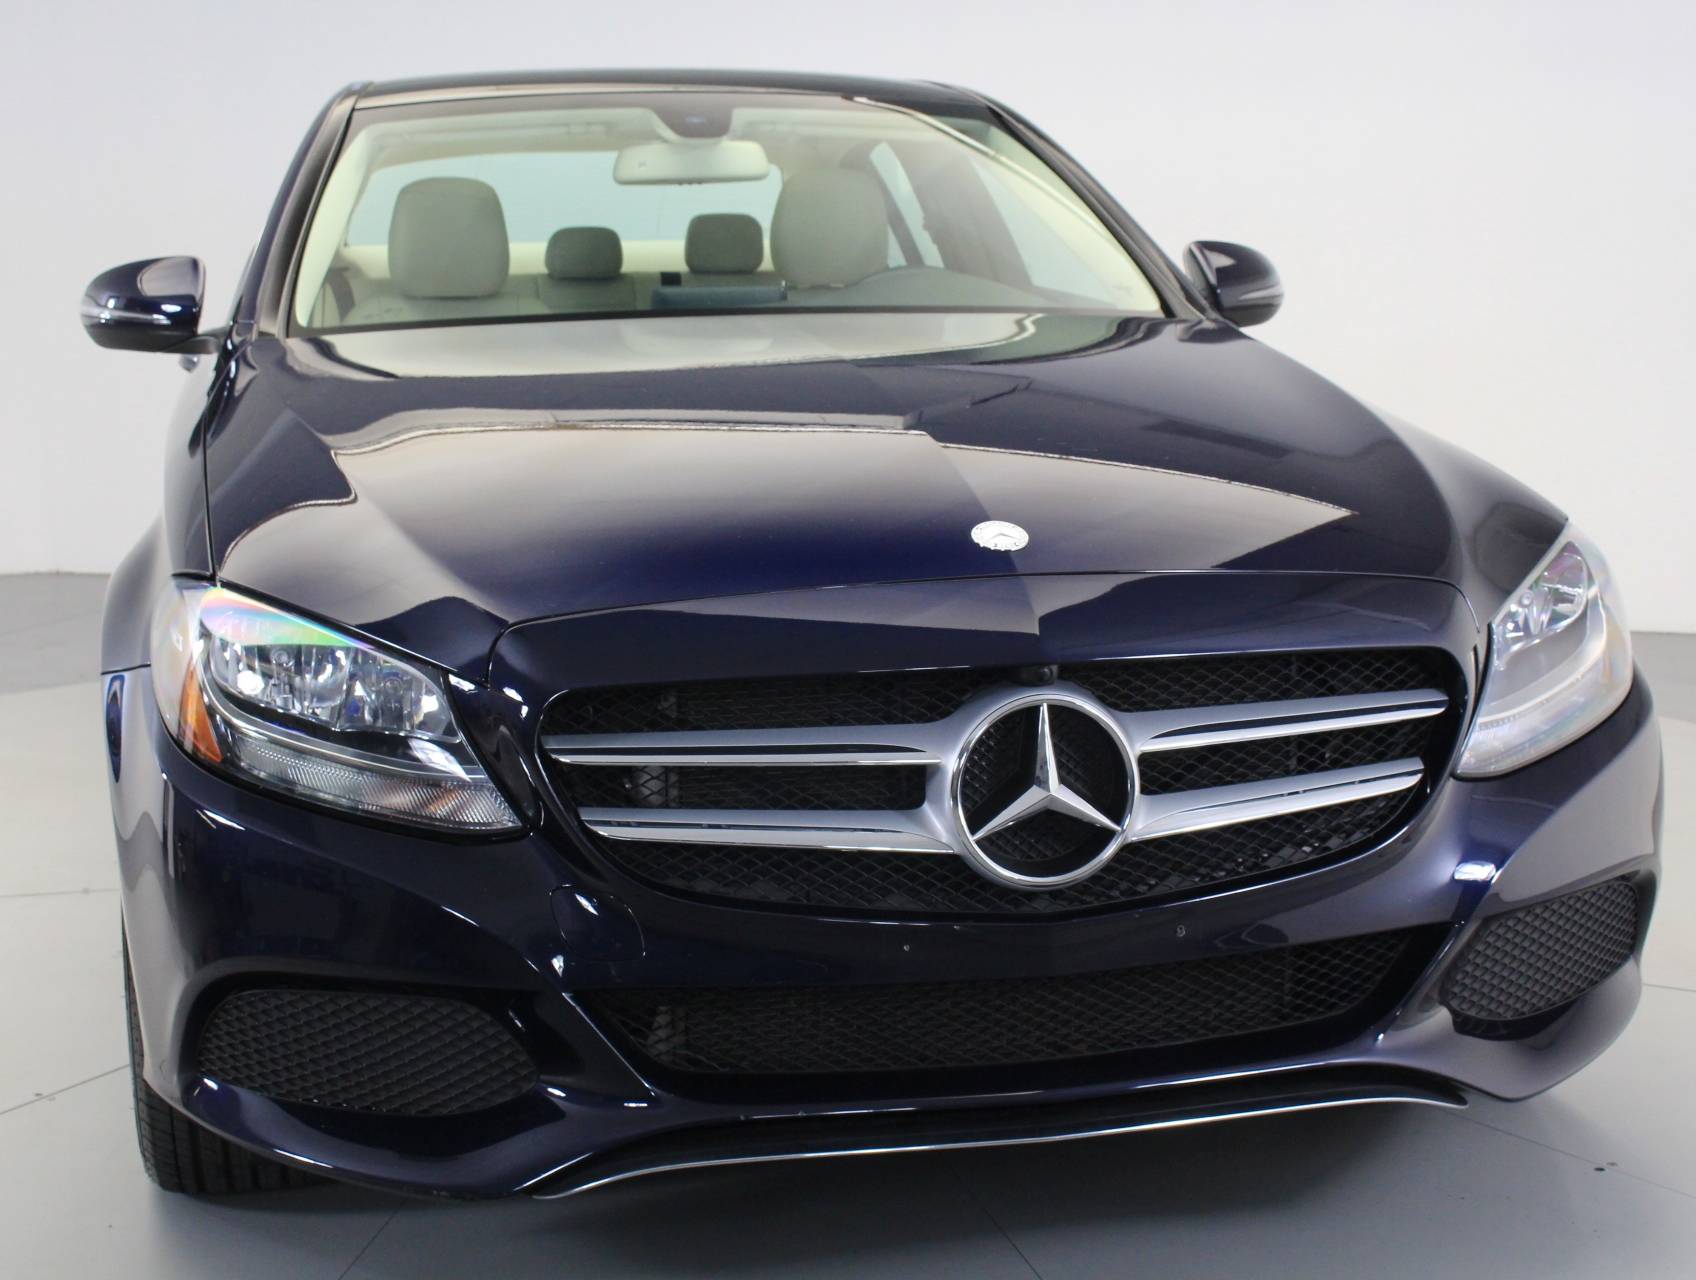 Florida Fine Cars - Used MERCEDES-BENZ C CLASS 2016 WEST PALM C300 4MATIC